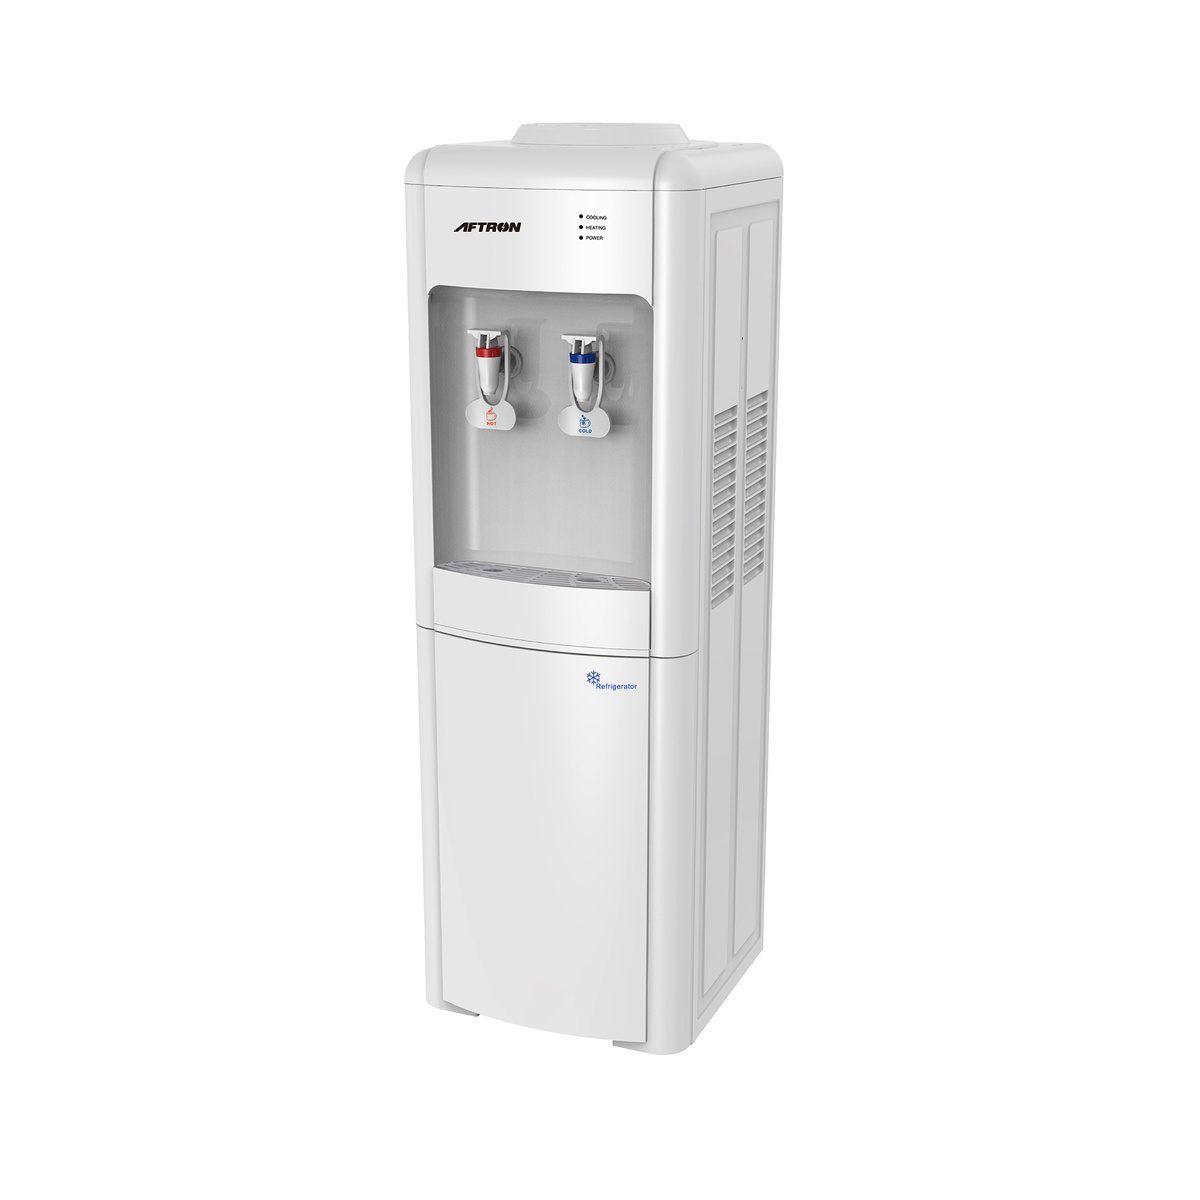 Aftron Hot and Cold Water Dispenser with Refrigerator, AFWD5885